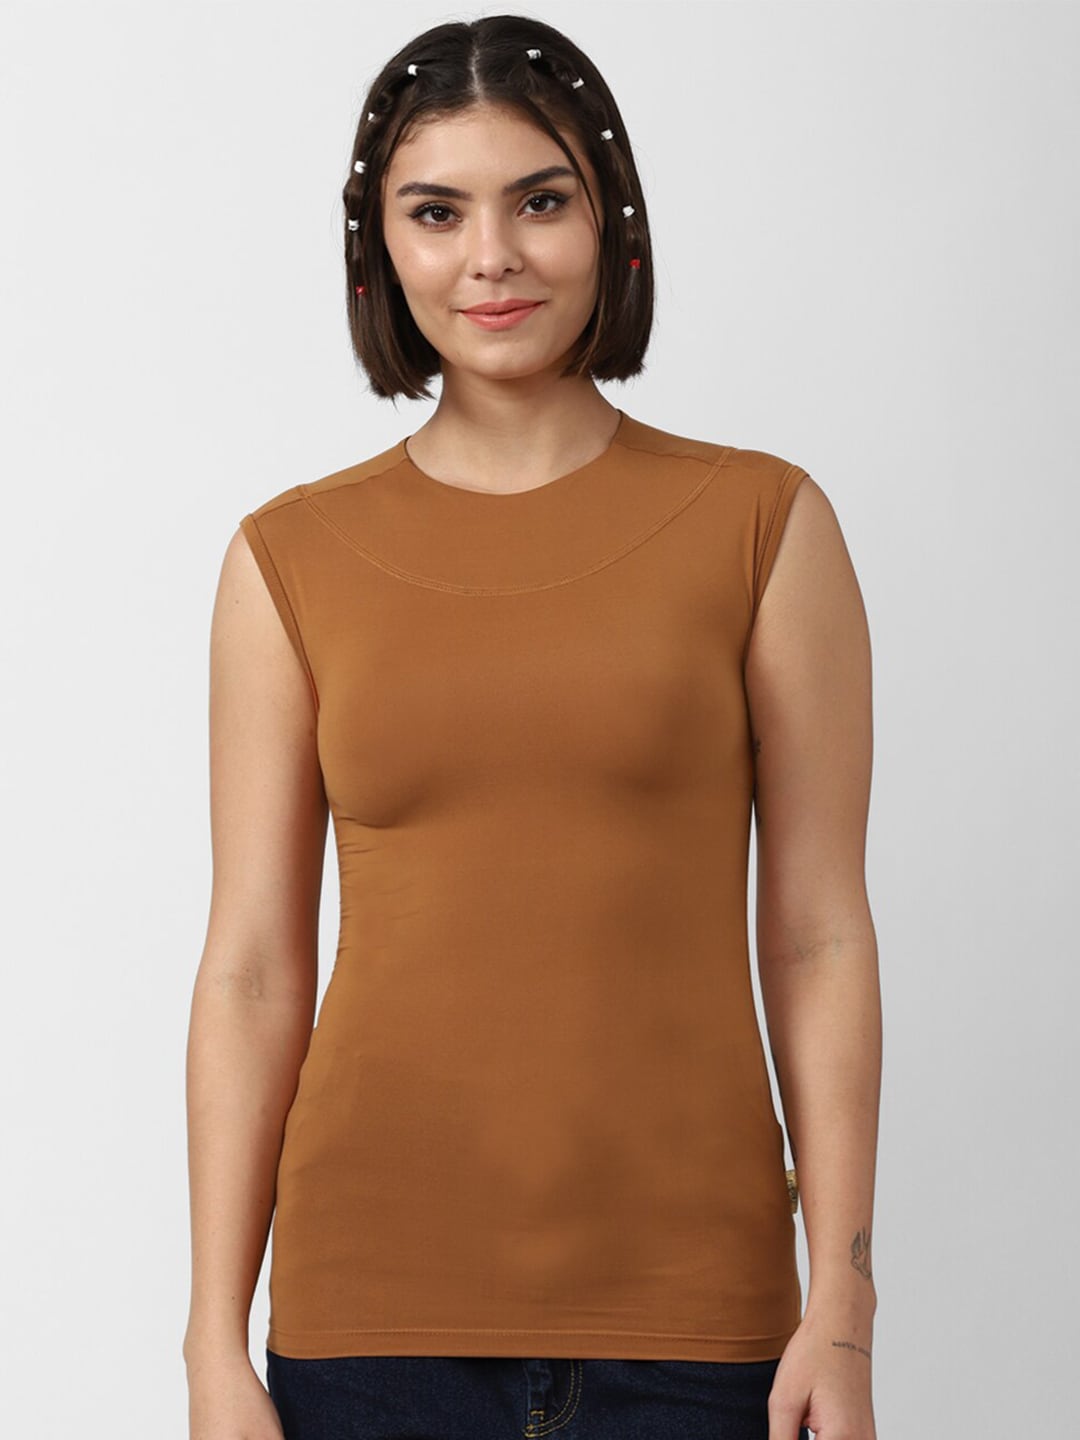 FOREVER 21 Rust Solid Sleeveless Top Price in India